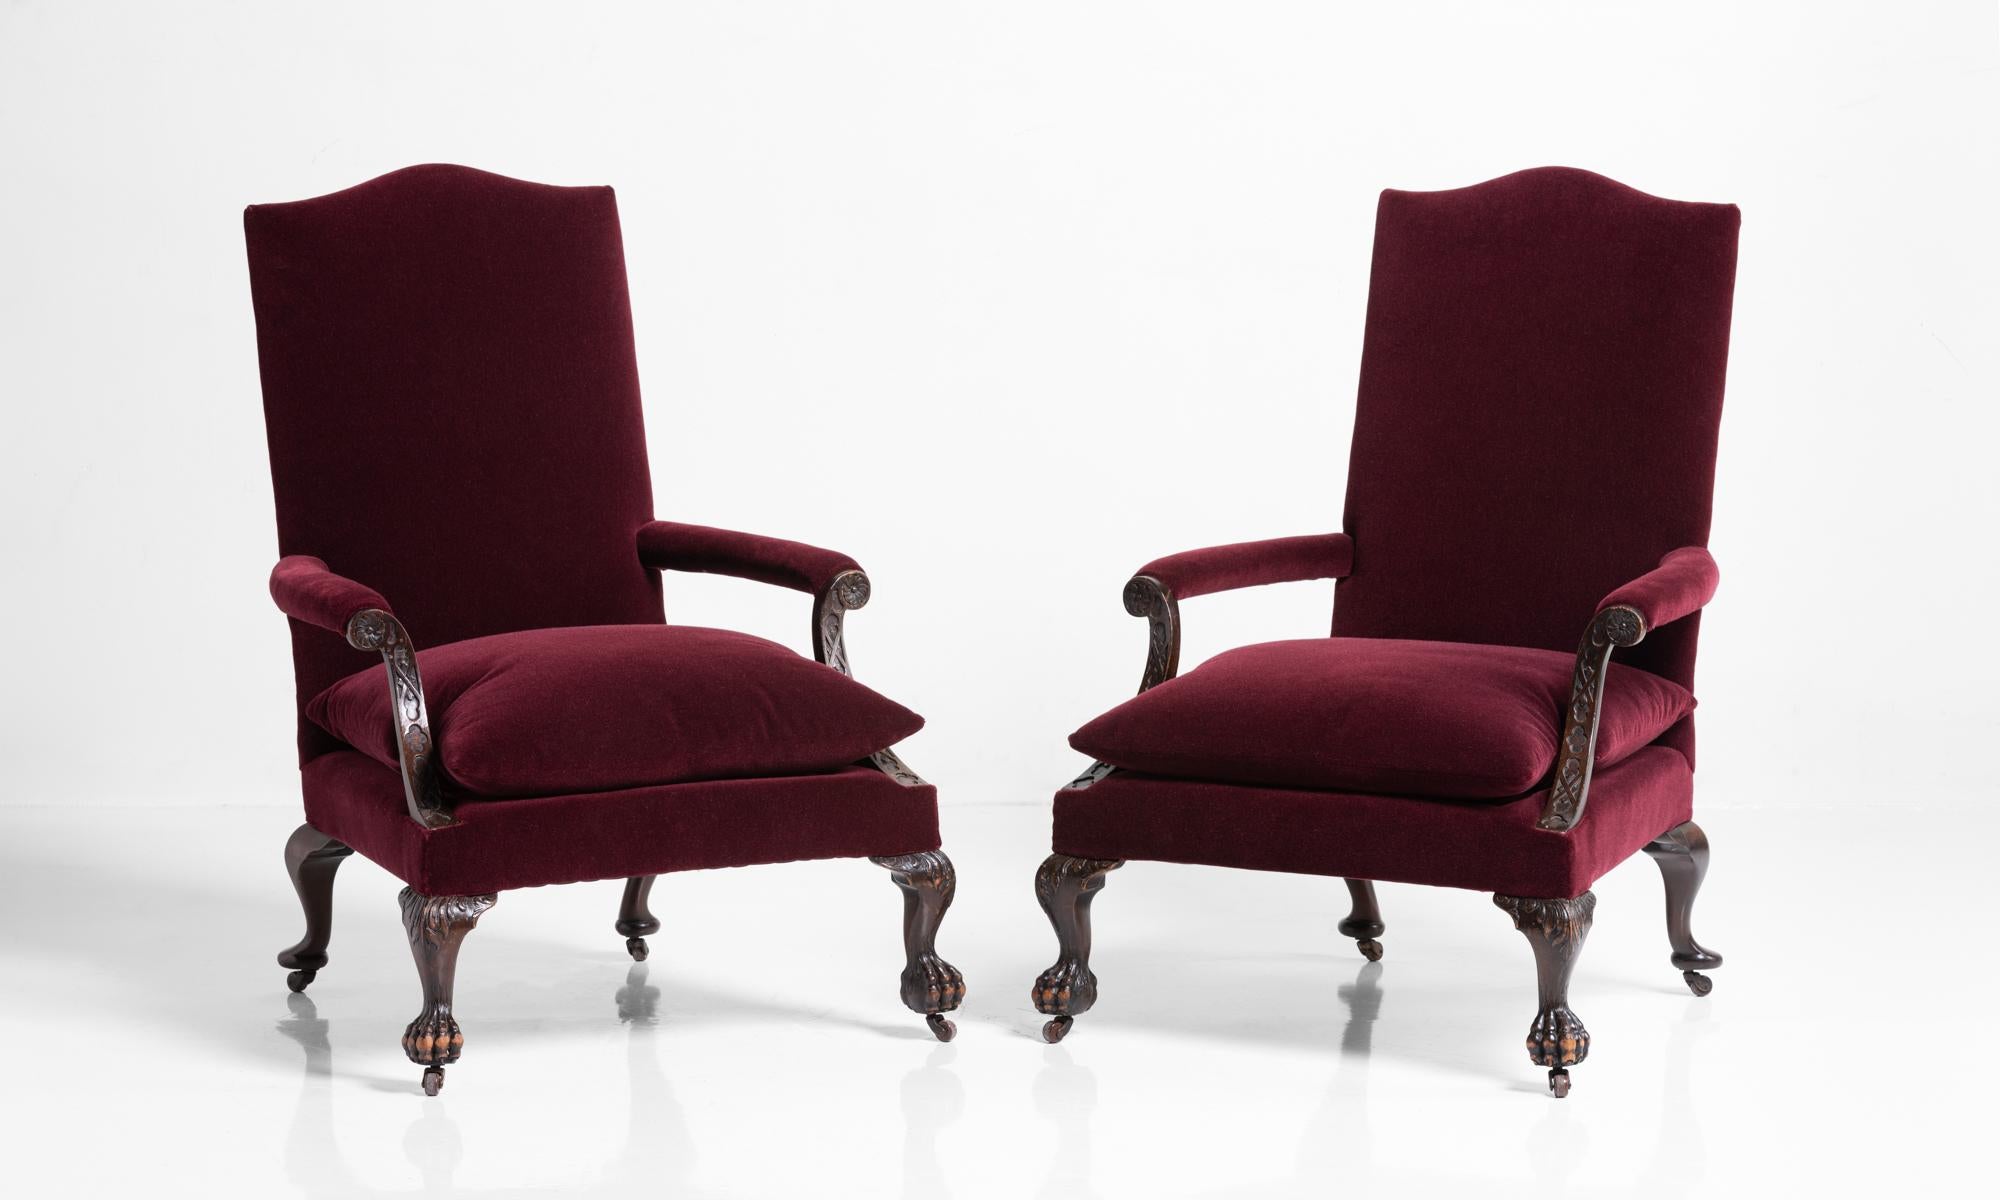 Pair of ball and claw armchairs, England, circa 1890.

Generously sized and newly upholstered in Maharam mohair alongside beautiful detailing on the arms and feet.